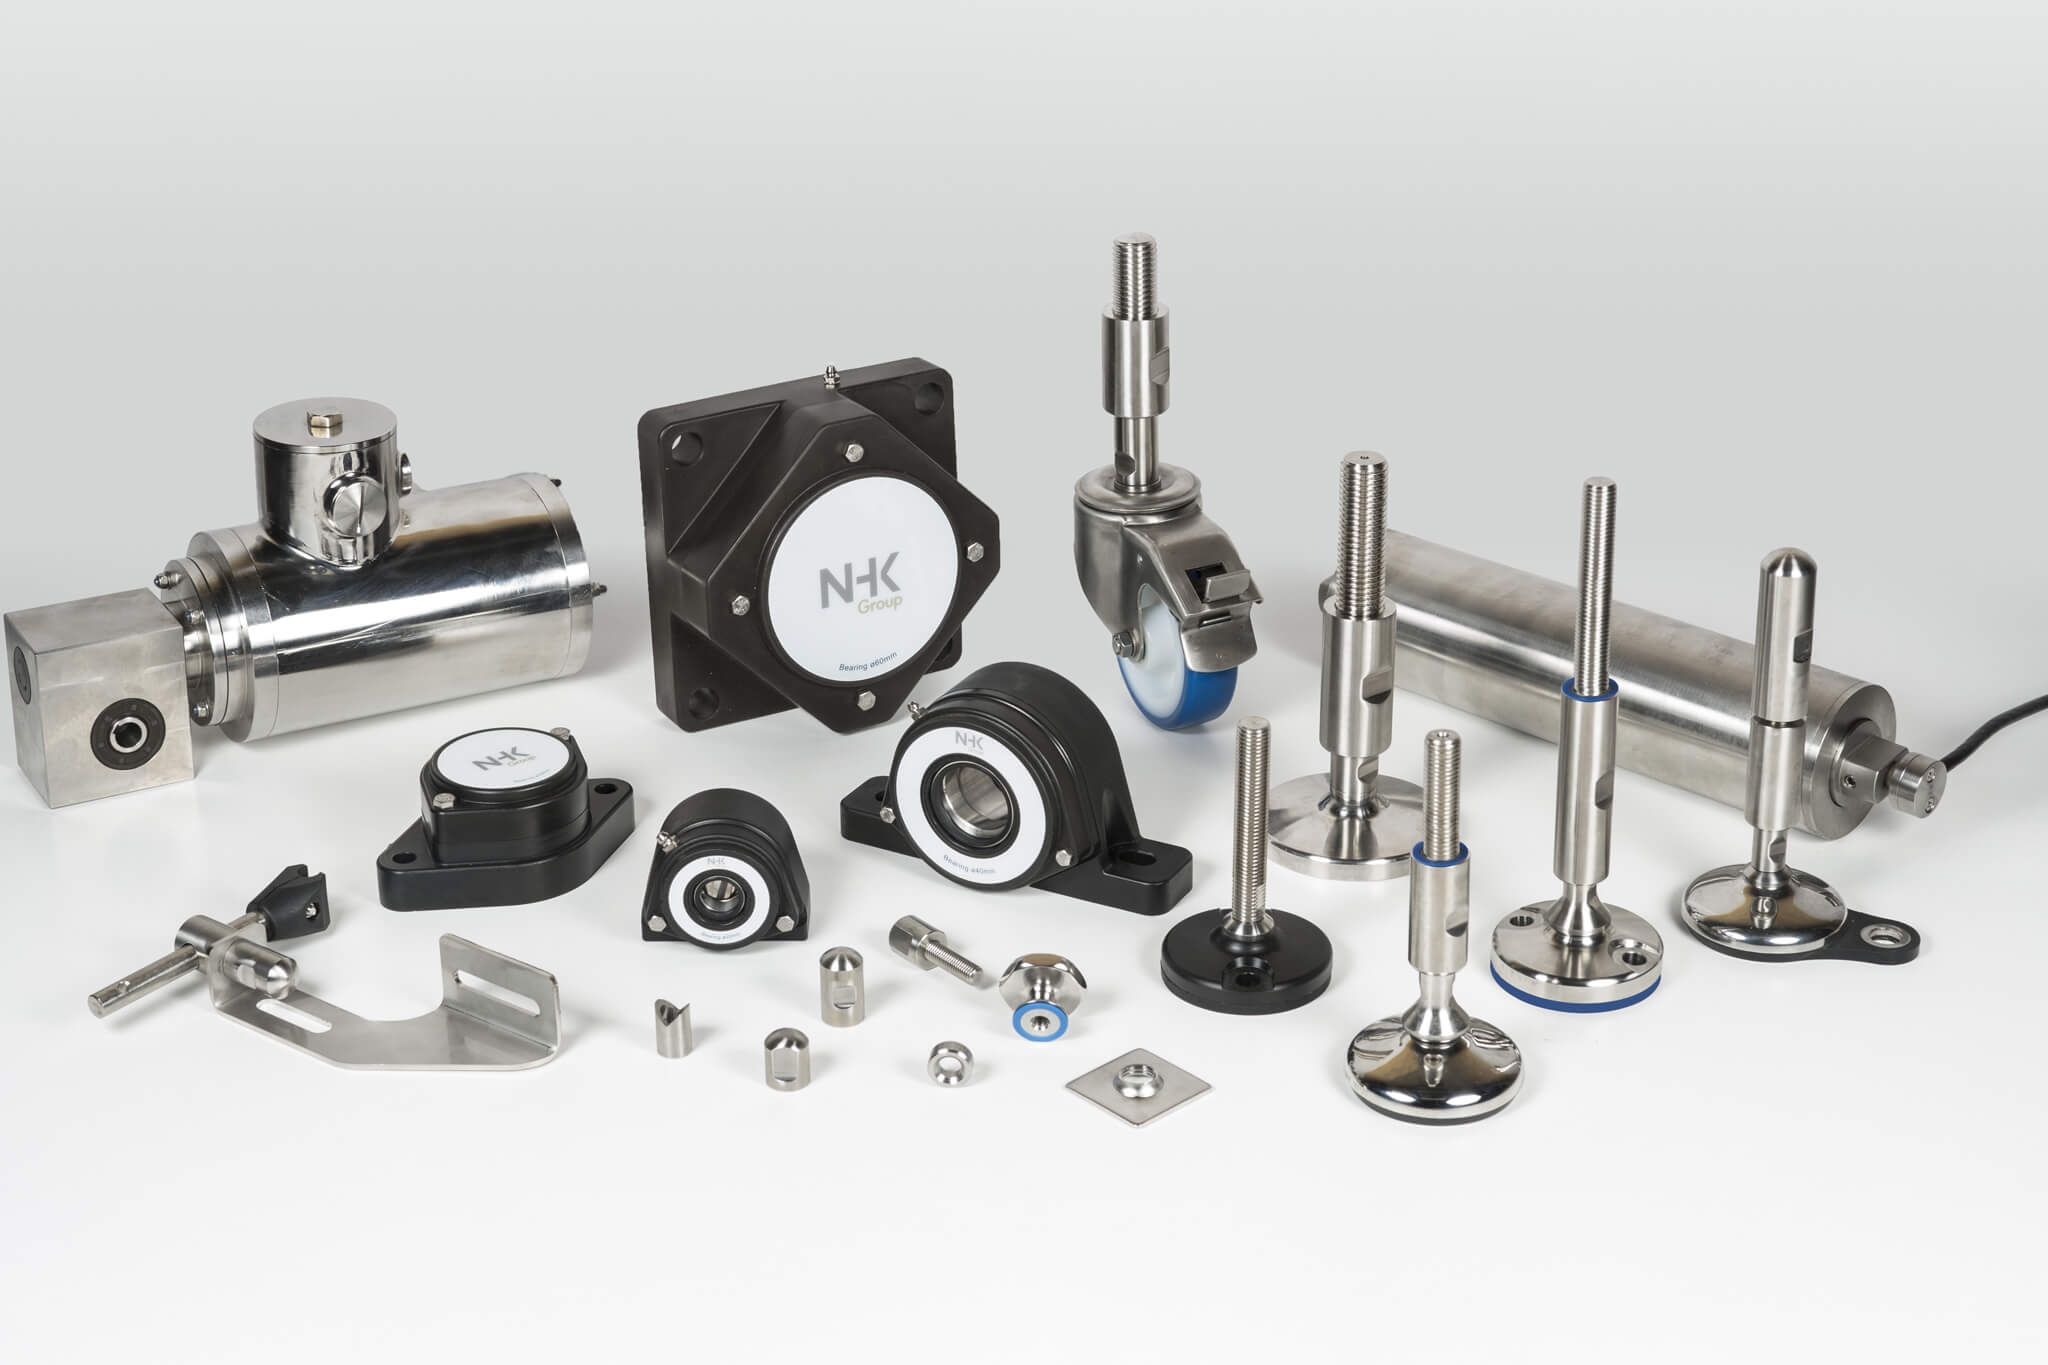 Hygienic machinery components and parts for advanced processing systems